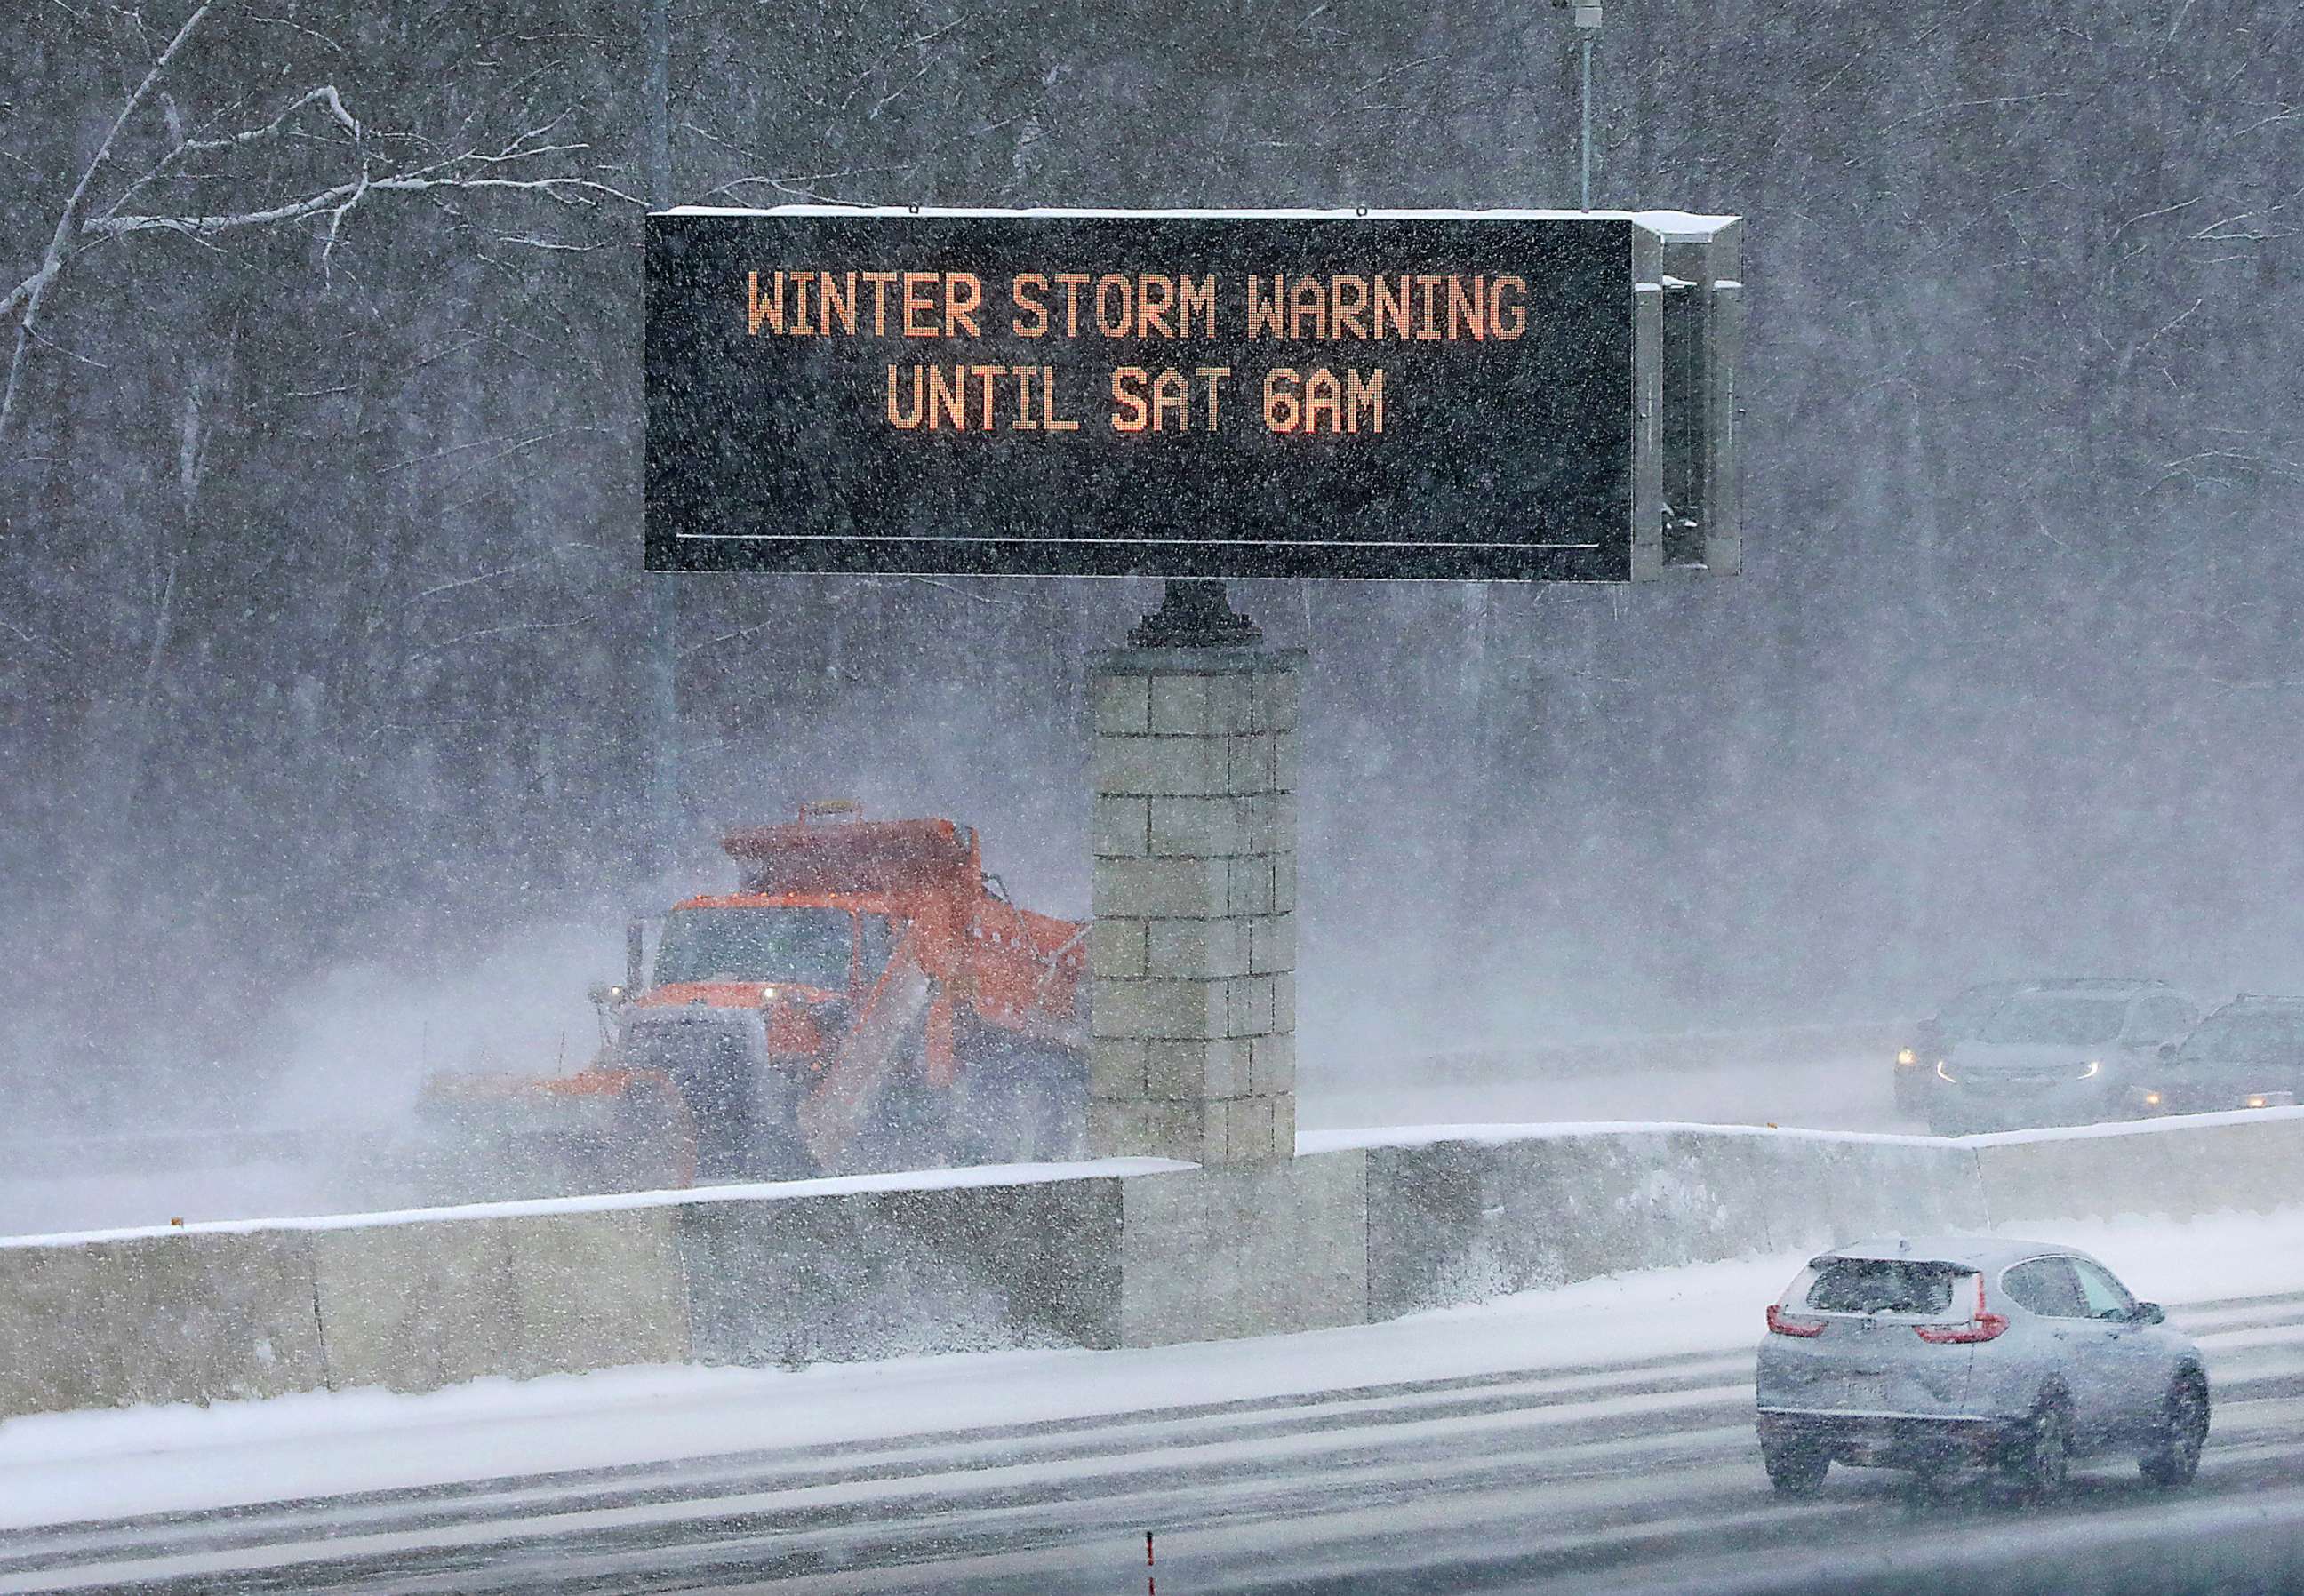 PHOTO: Traffic and snow maintenance vehicles clear the roadway as a traffic sign cautions drivers about the conditions along State Highway 14/18, Dec, 22, 2022, in Madison, Wis.